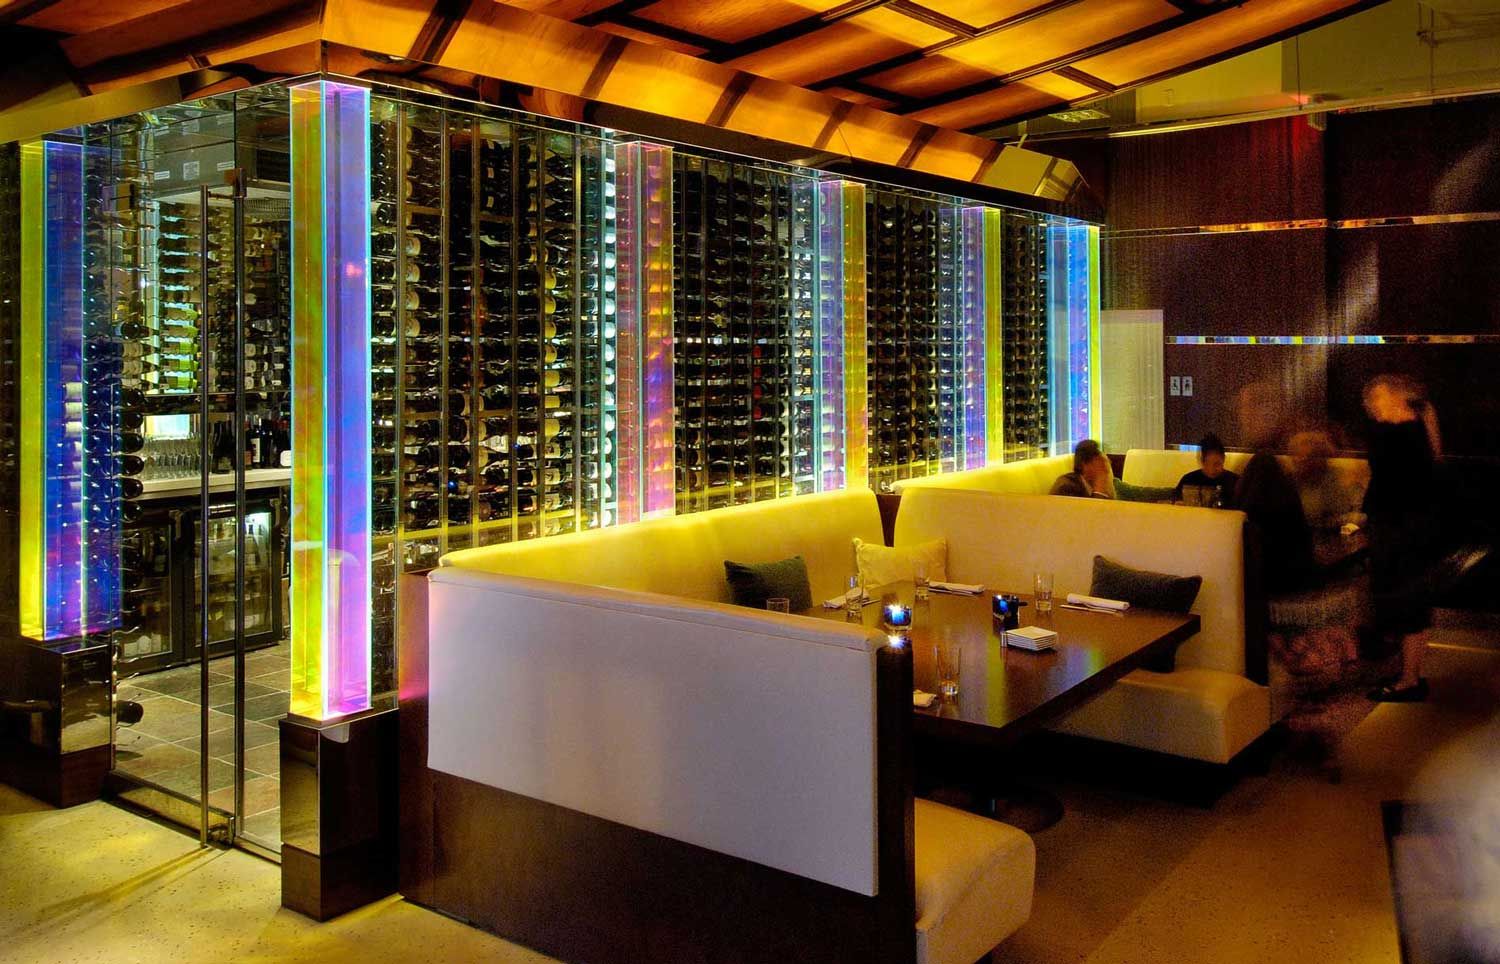 Dichroic glass incorporated into the wine cellar at a restaurant and bar.